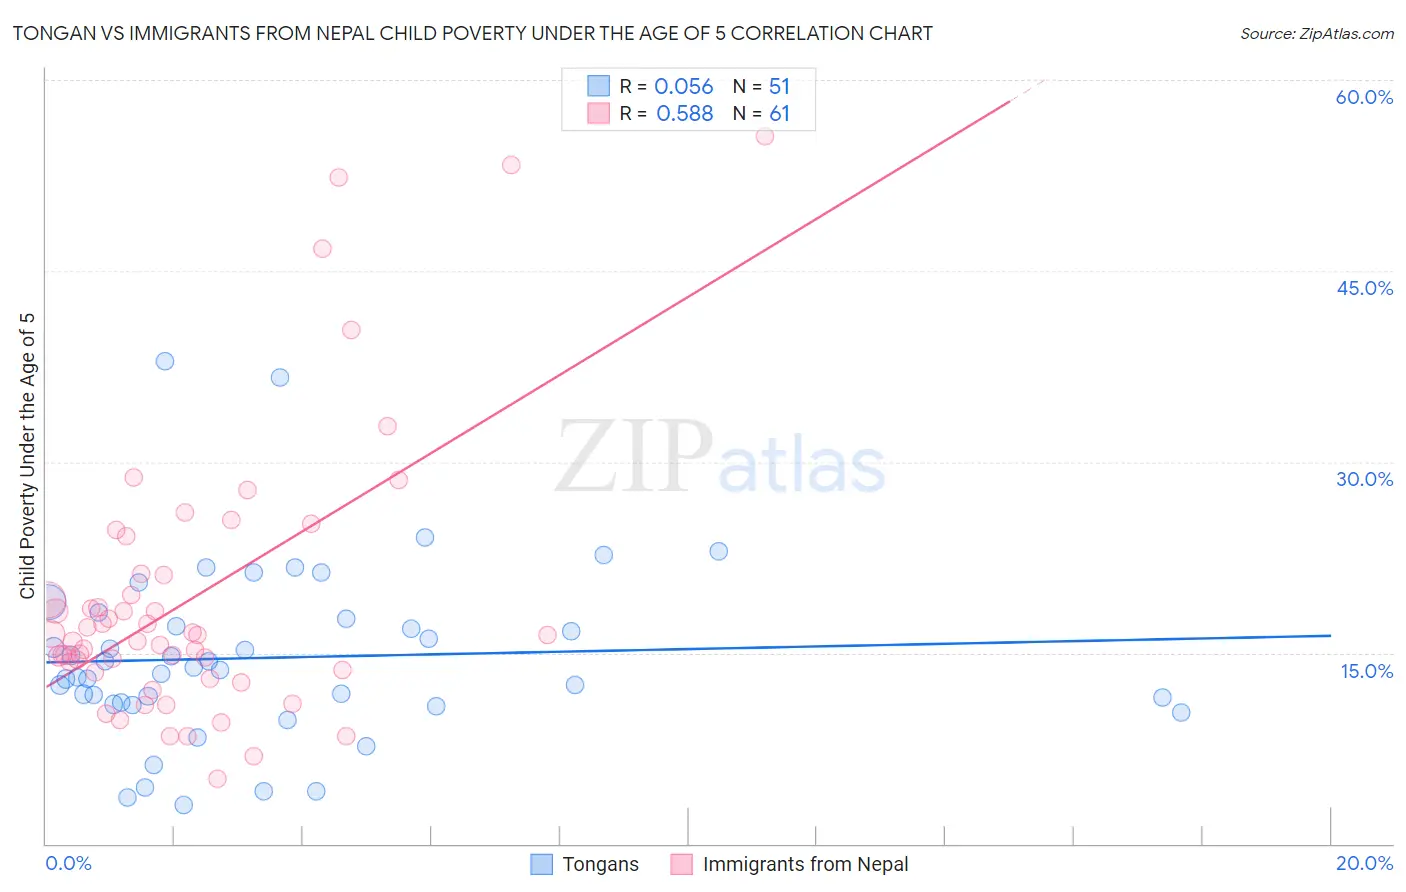 Tongan vs Immigrants from Nepal Child Poverty Under the Age of 5